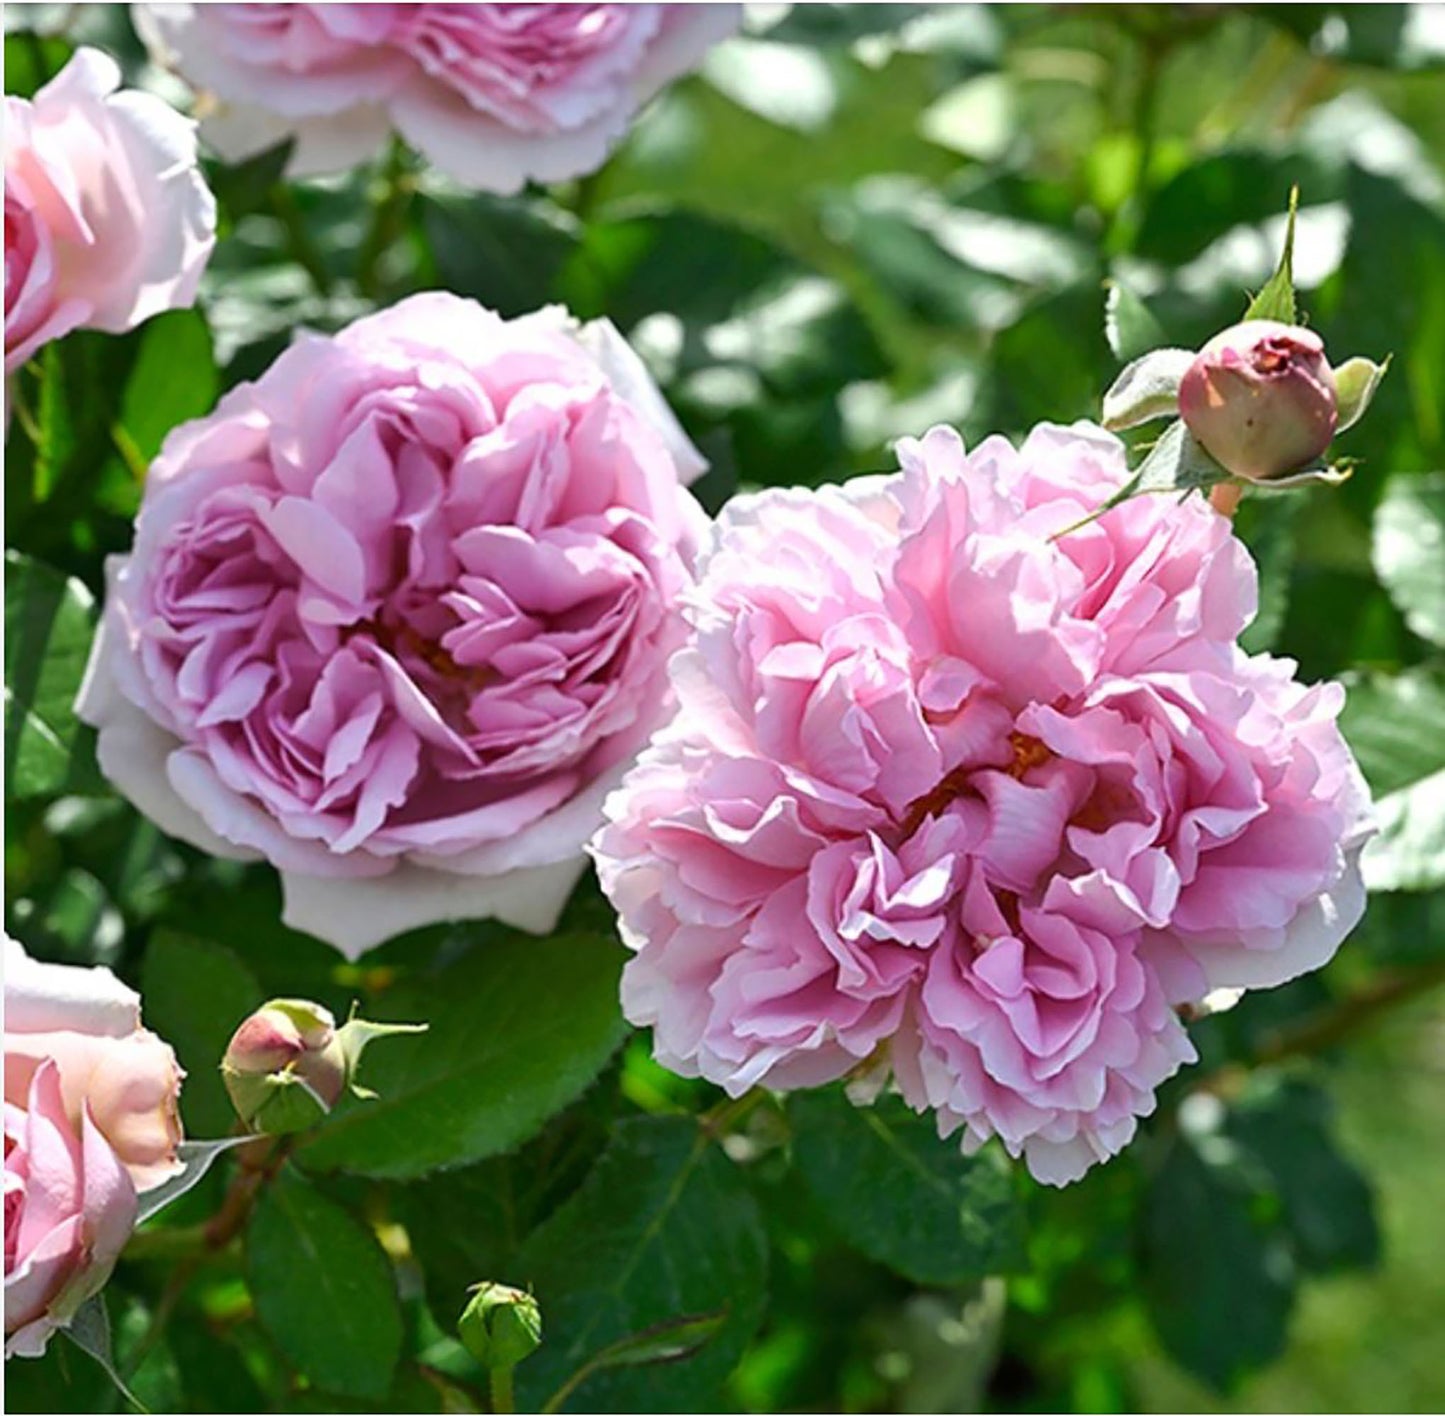 Rose Antoinette 绝代艳后, Shrub Rose, Strong fragrance. Large. Heat Resistant.2 Years Old 1 Gal, Non-Grafted/Own Root.